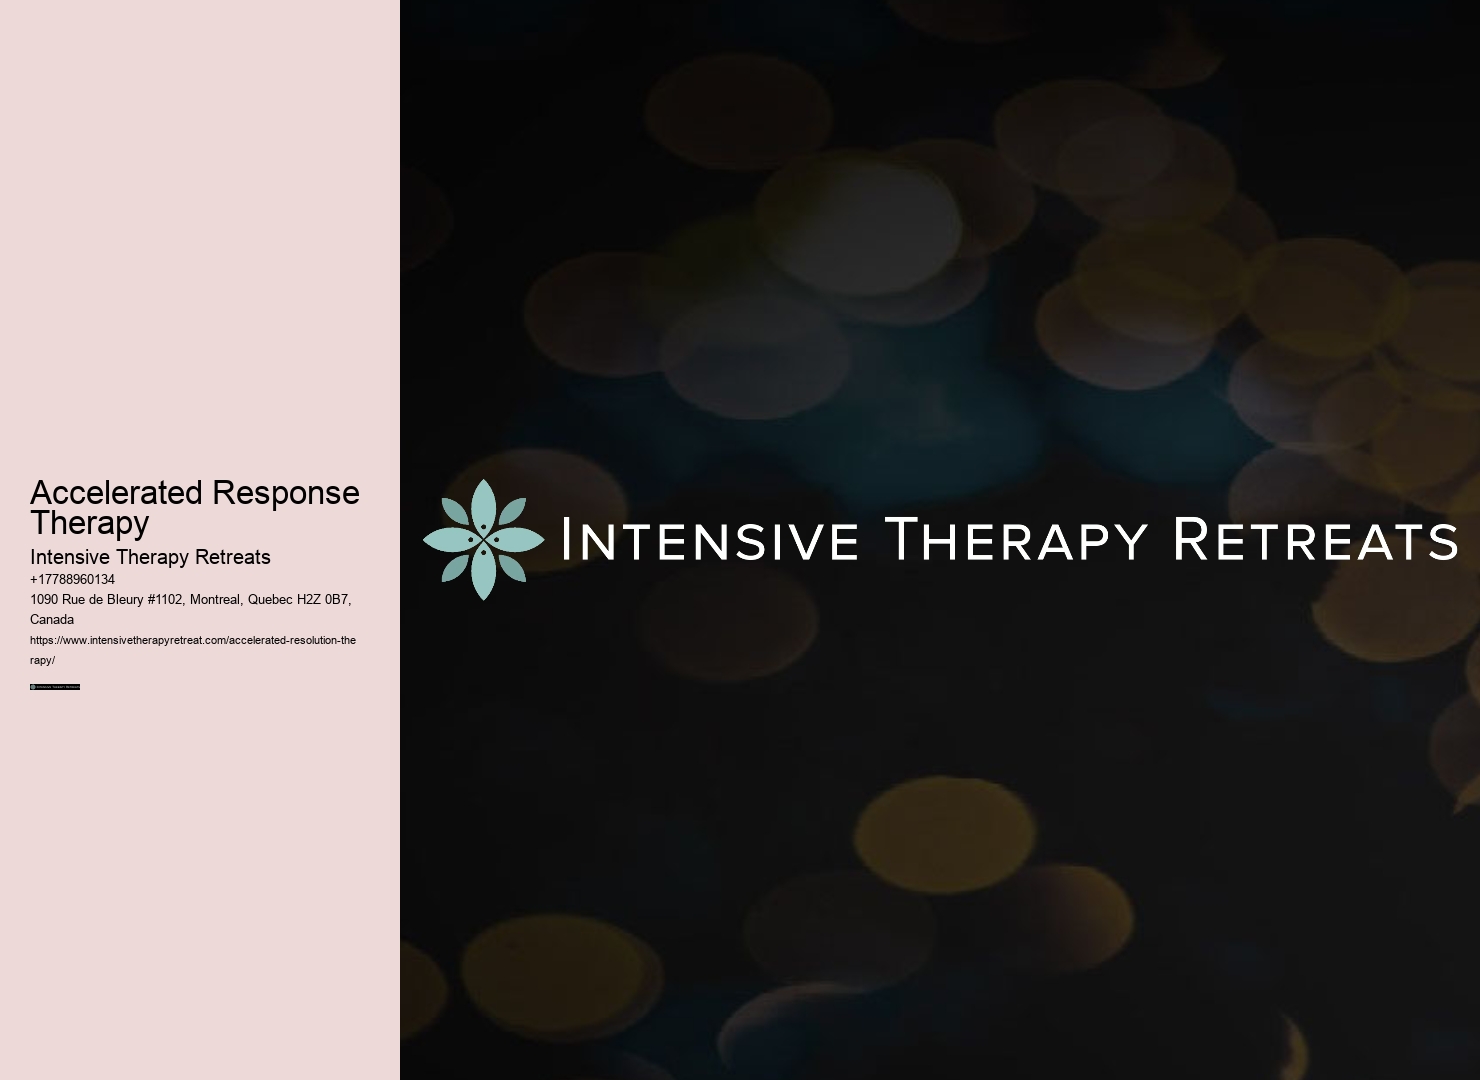 Accelerated Response Therapy